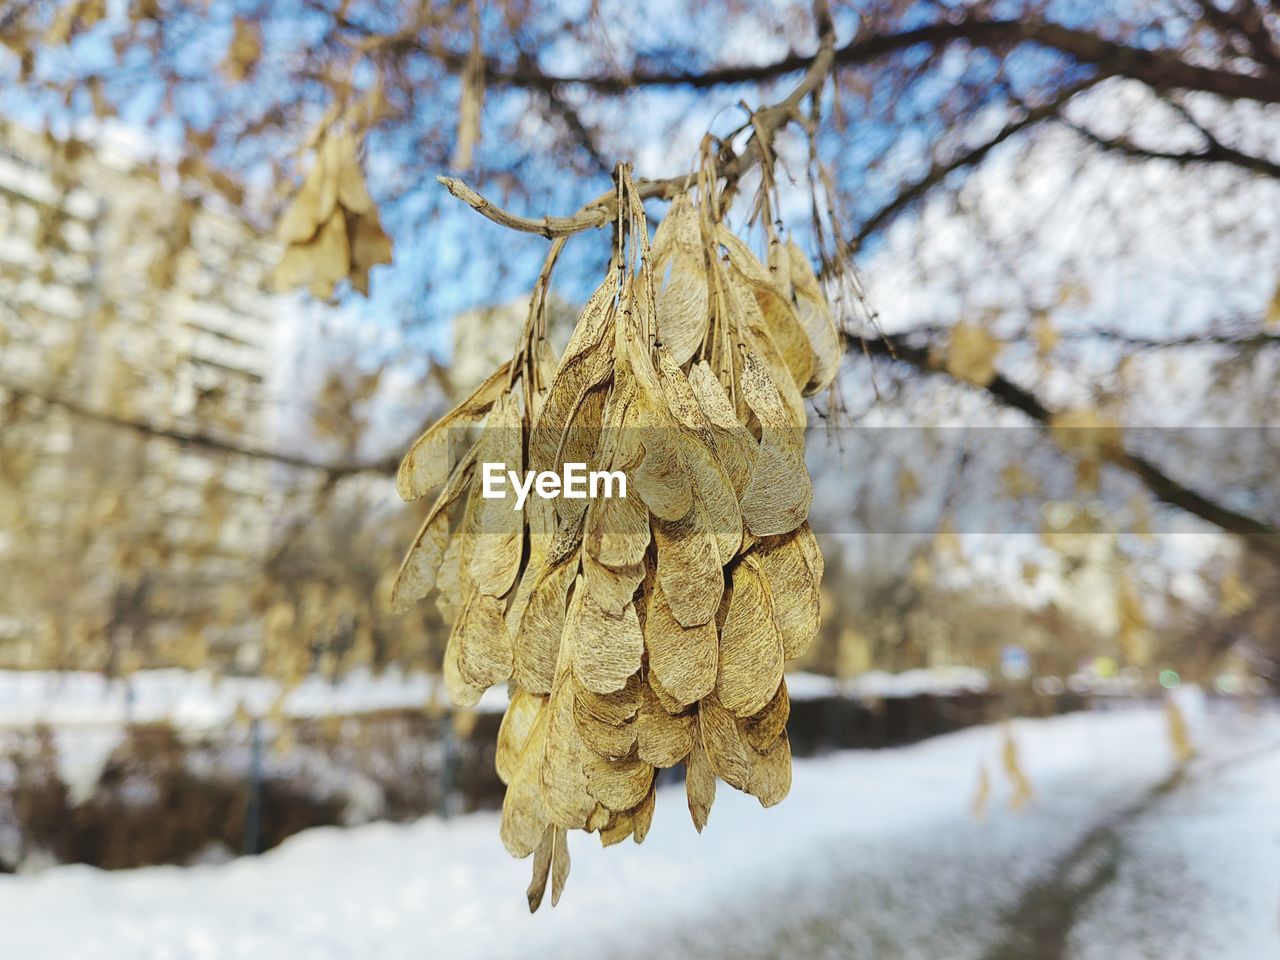 winter, tree, leaf, autumn, cold temperature, plant, snow, nature, branch, spring, focus on foreground, no people, day, flower, sky, close-up, frost, dry, beauty in nature, outdoors, frozen, hanging, tranquility